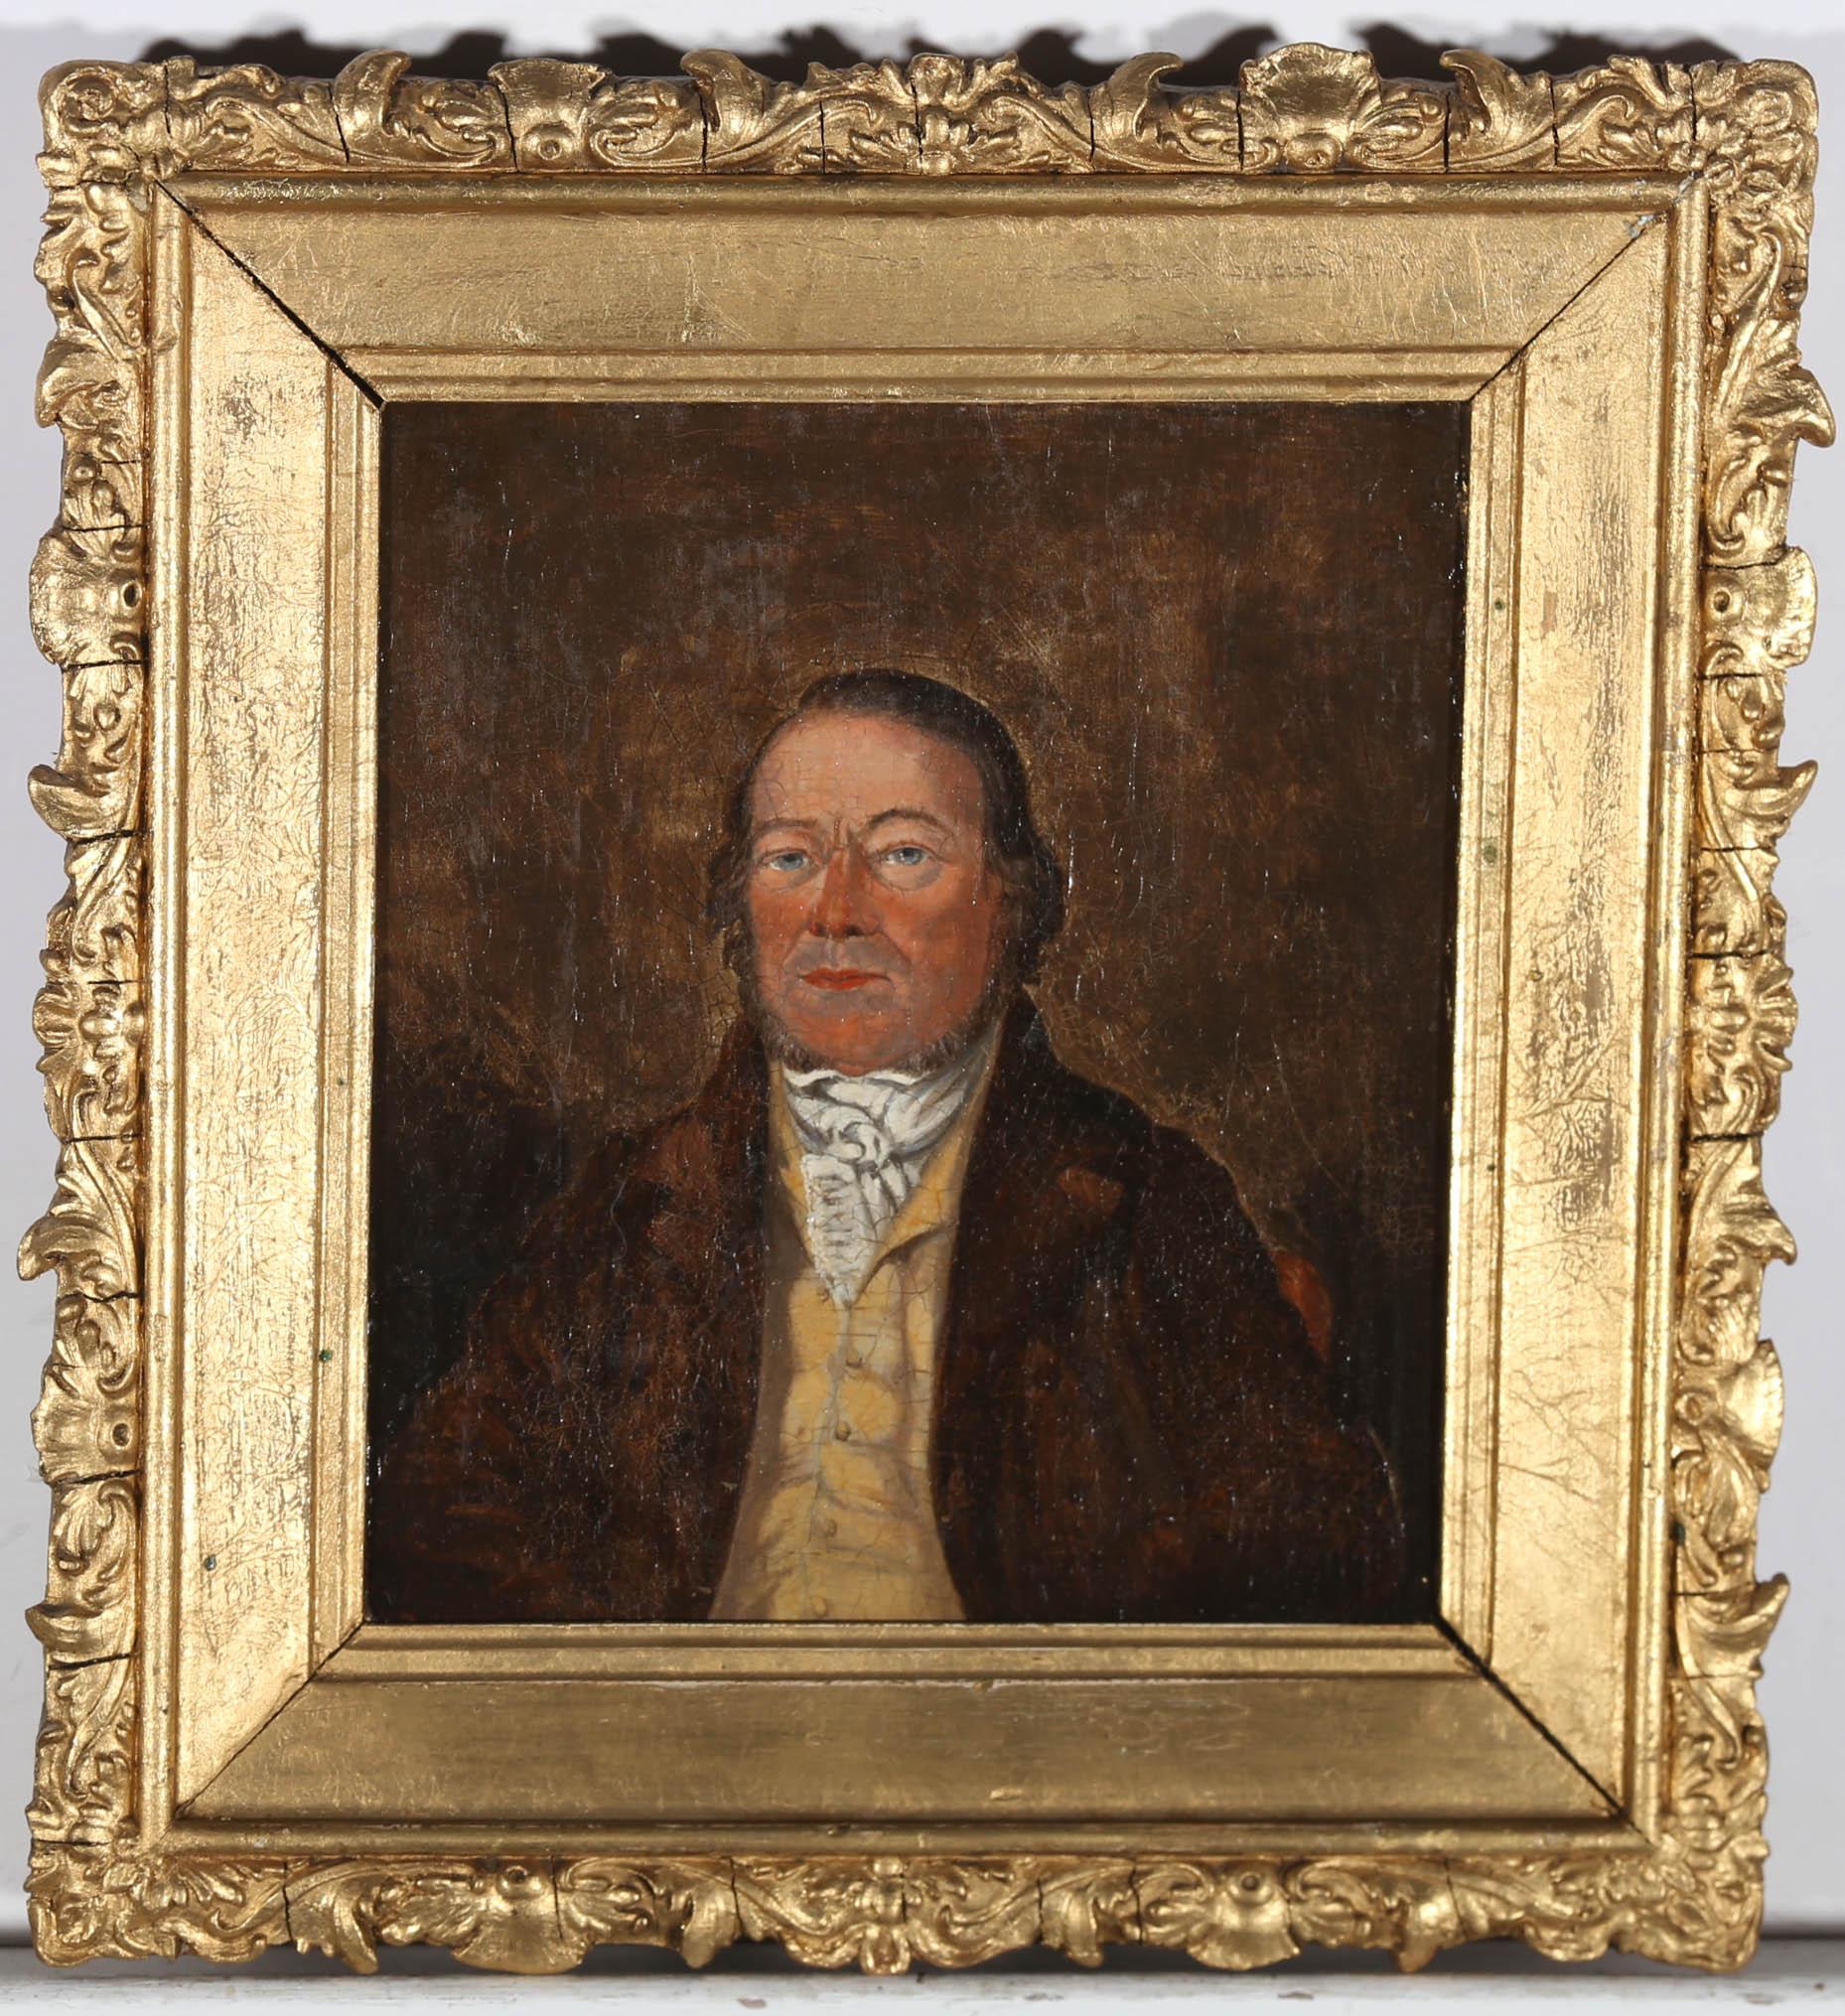 Unknown Portrait Painting - Early 19th Century Oil - A Ruddy Faced Man